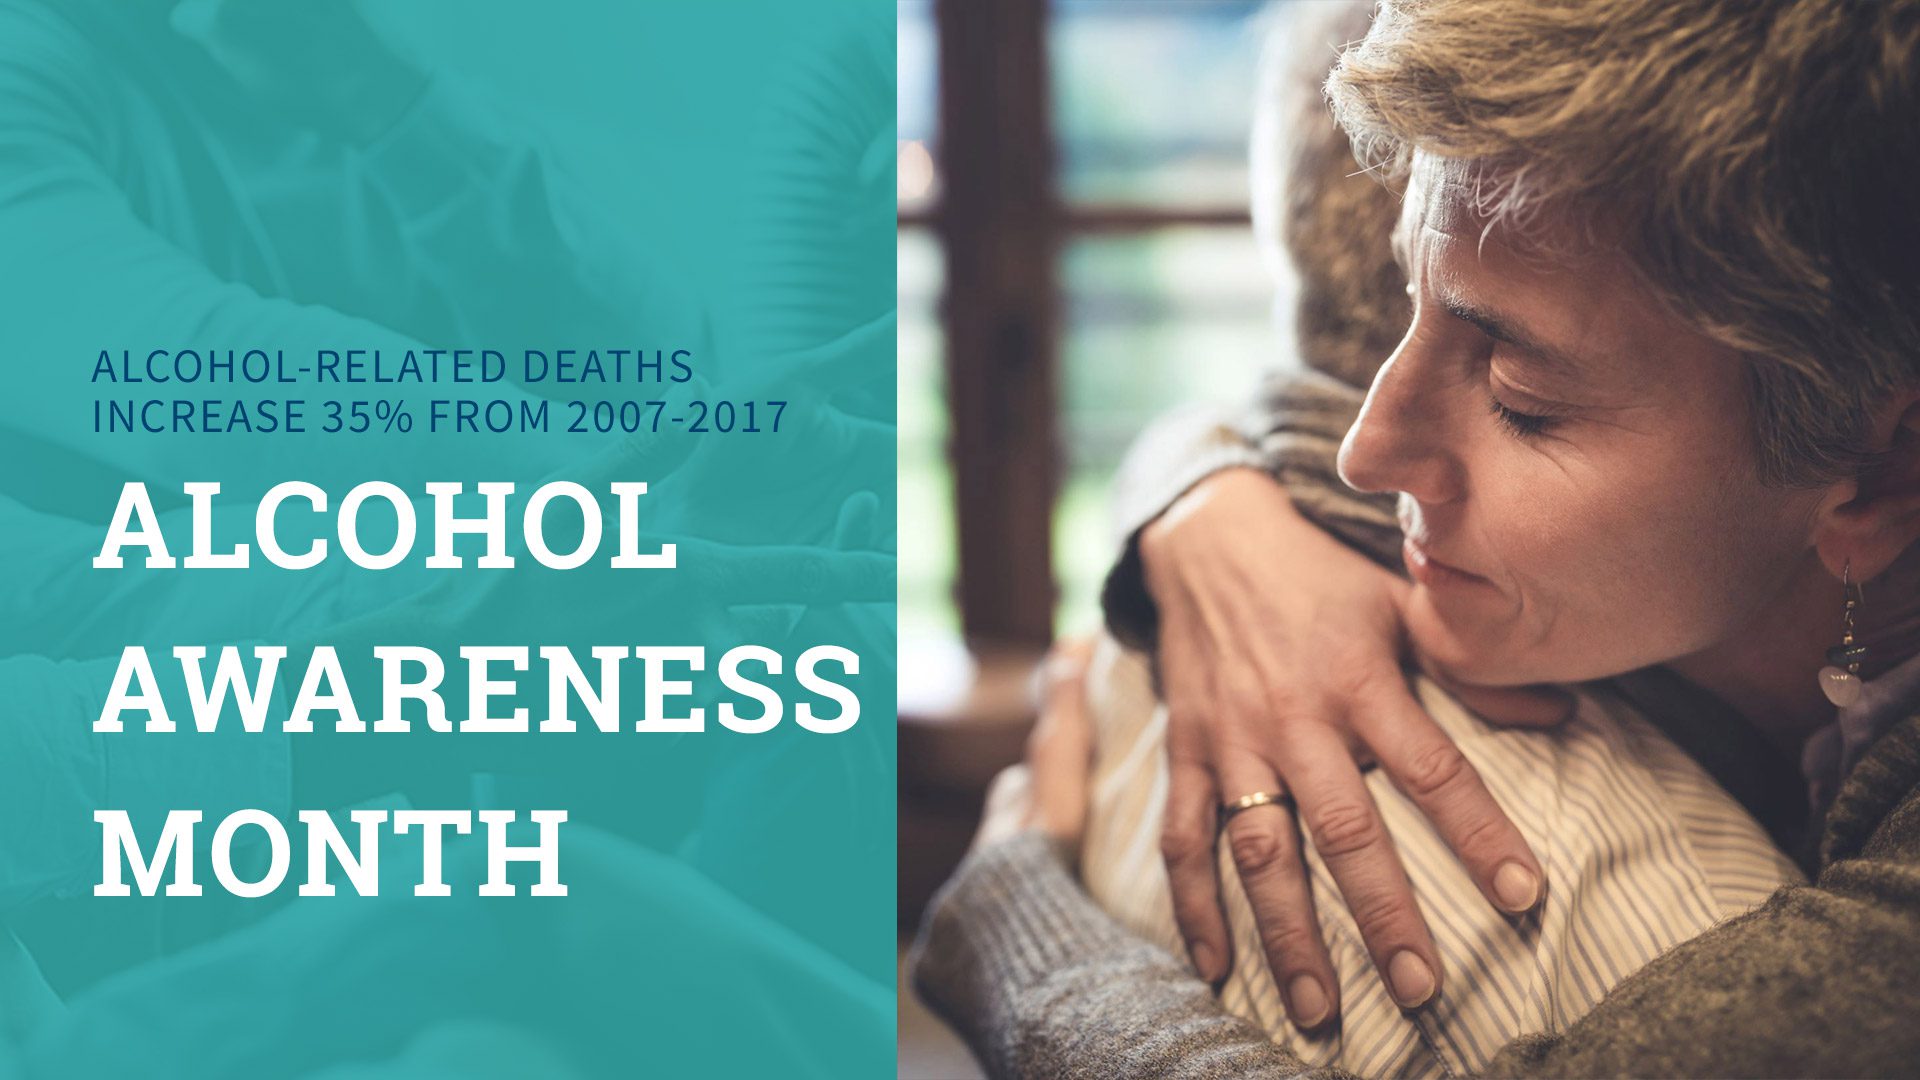 Alcohol Awareness Month: Alcohol-Related Deaths Increase 35% From 2007-2017